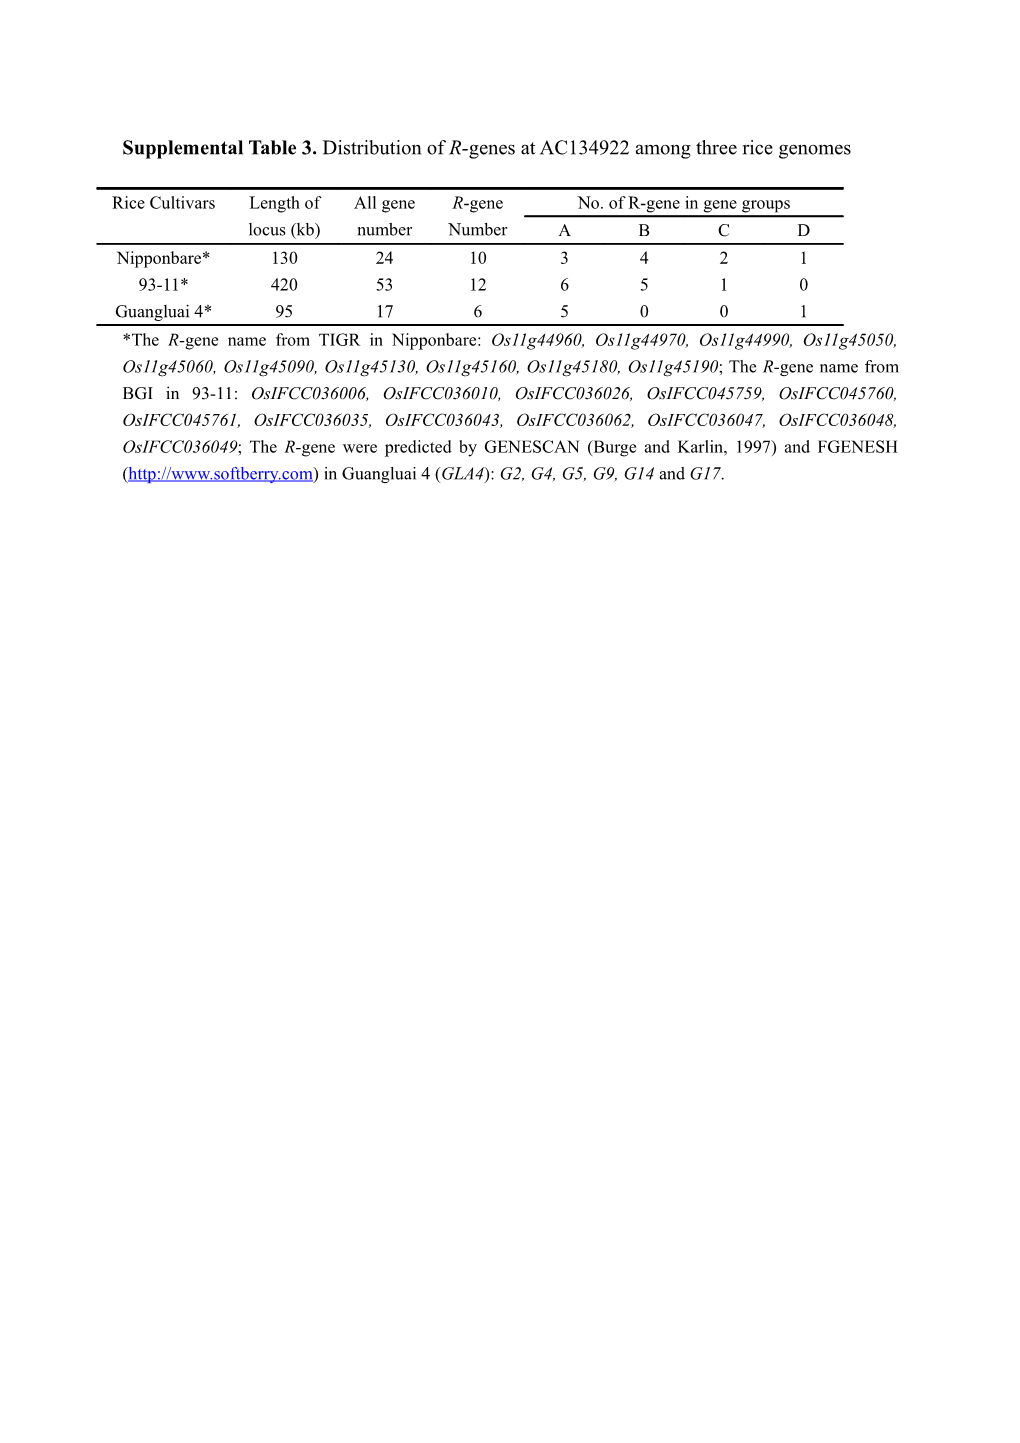 Supplemental Table 3. Distribution of R-Genes at AC134922 Among Three Rice Genomes